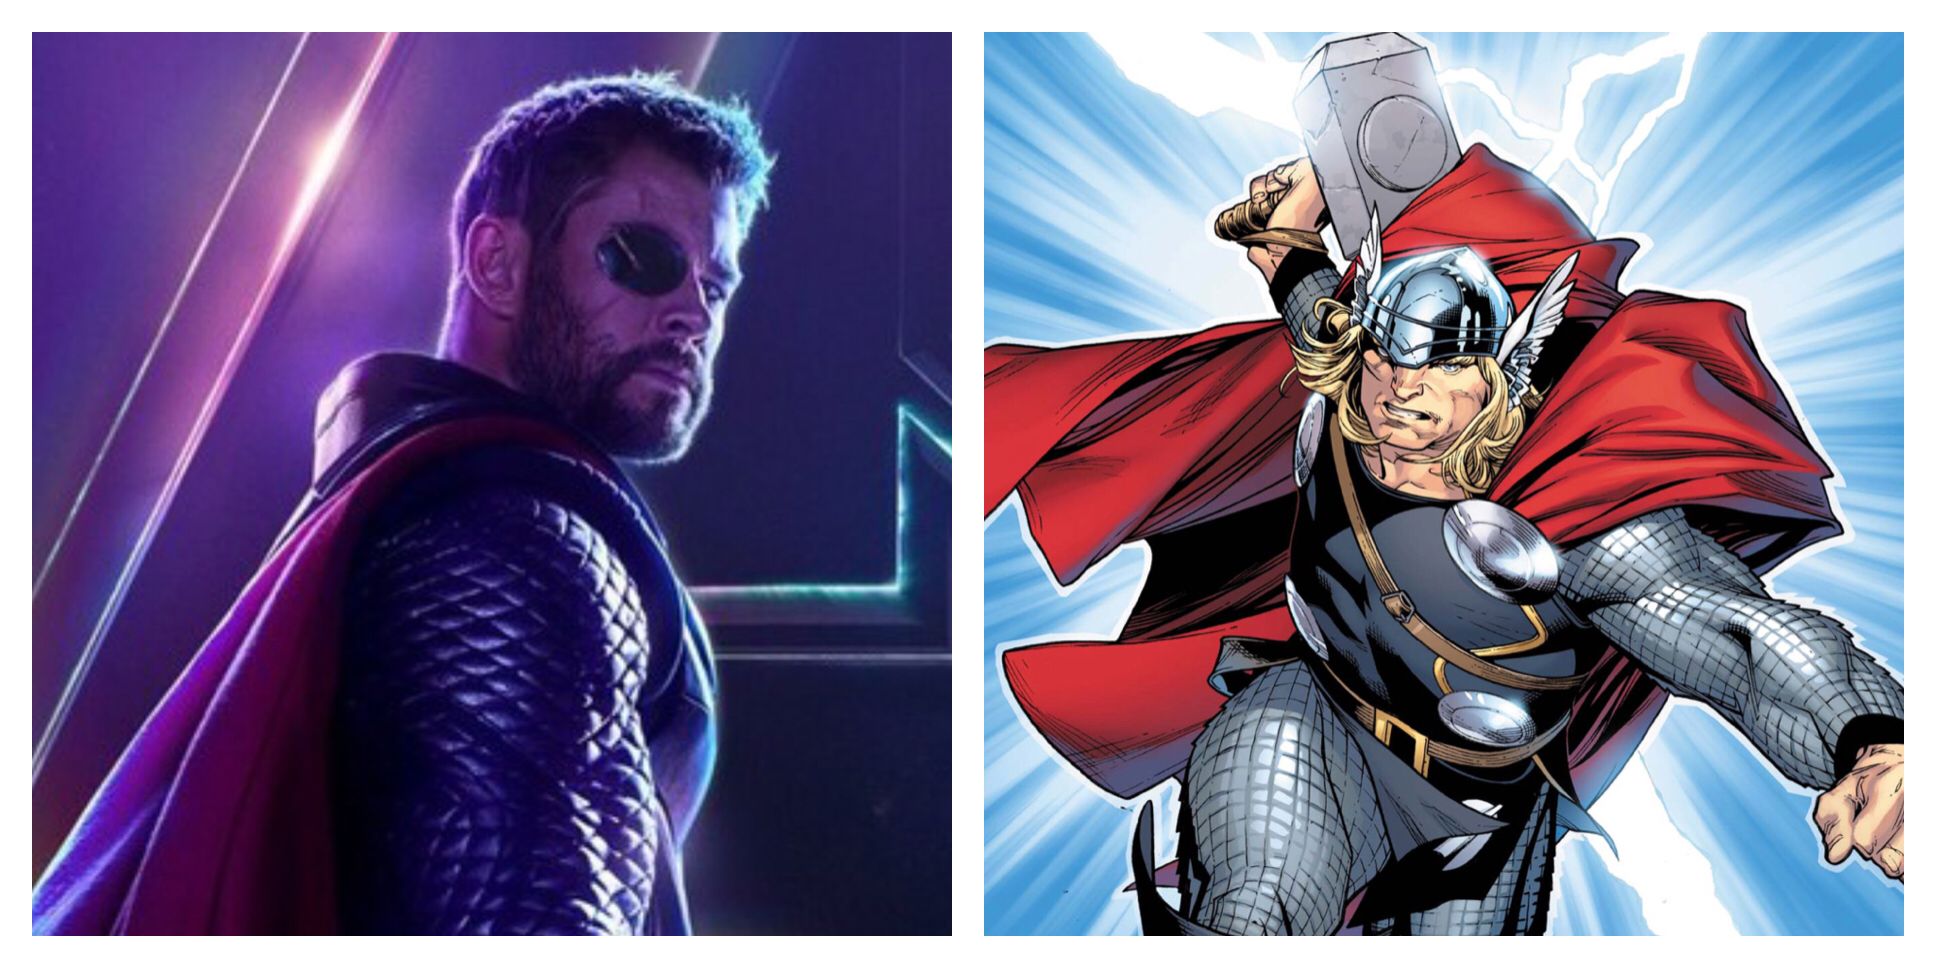 Comic Book Thor is Stronger Than MCU Thor